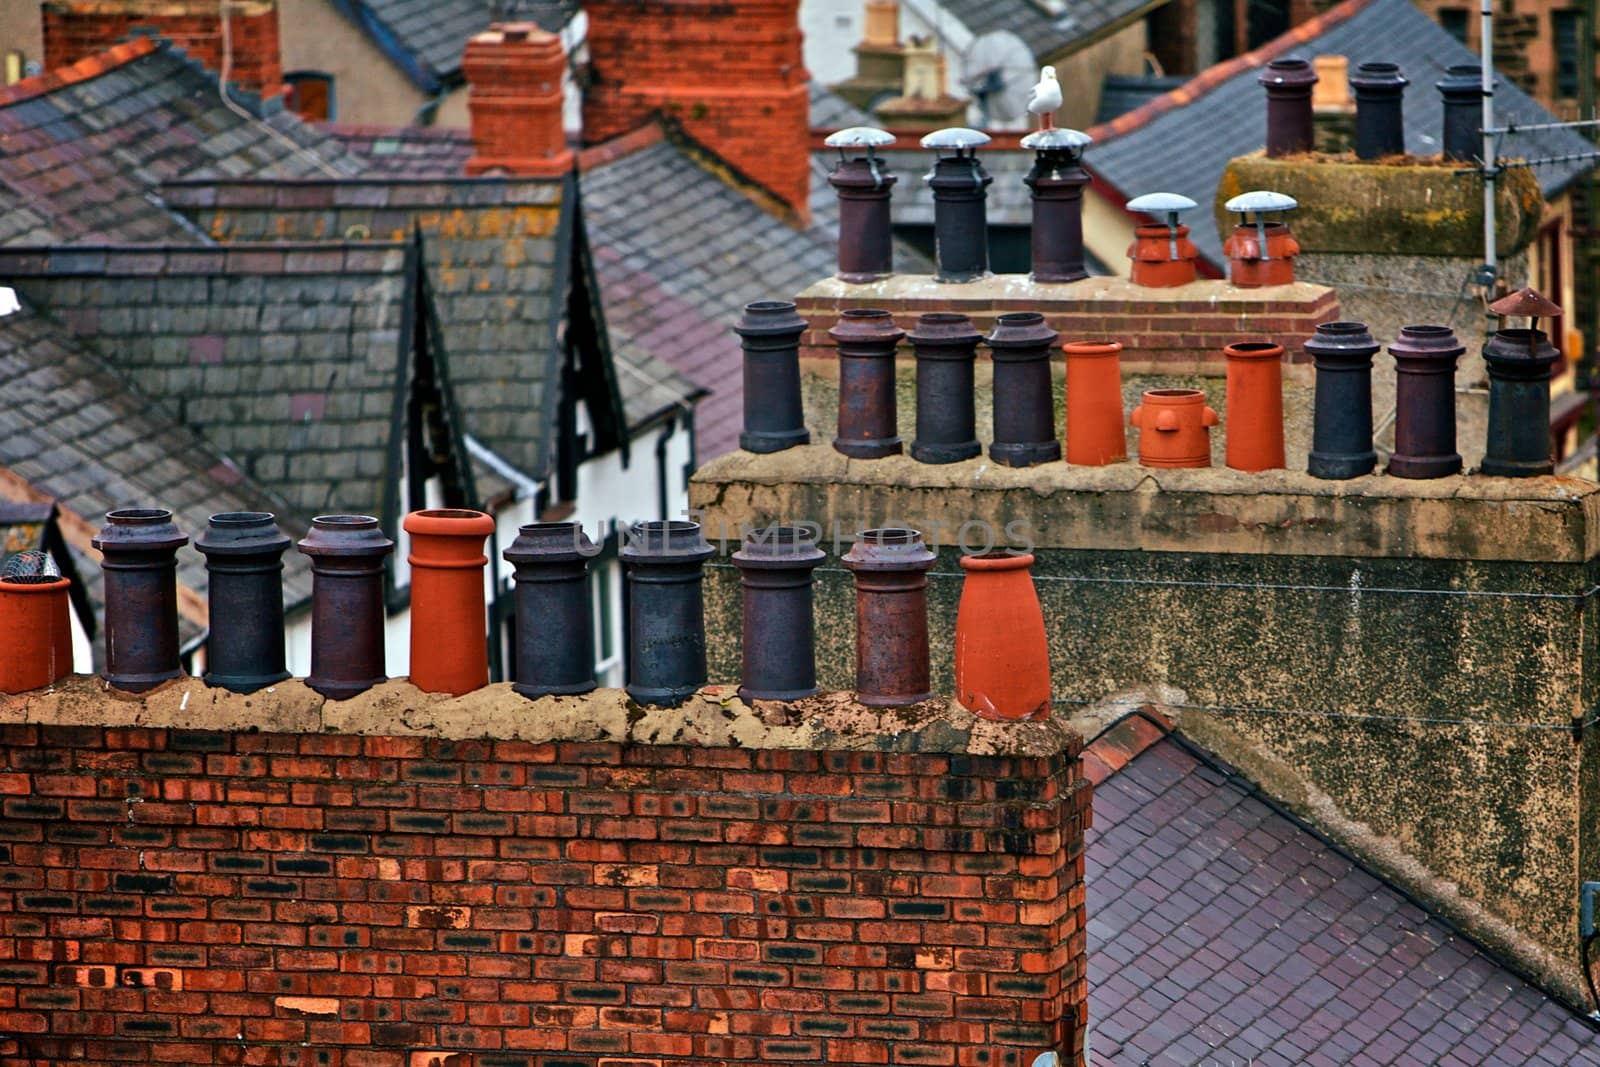 Chimneys in Wales, England